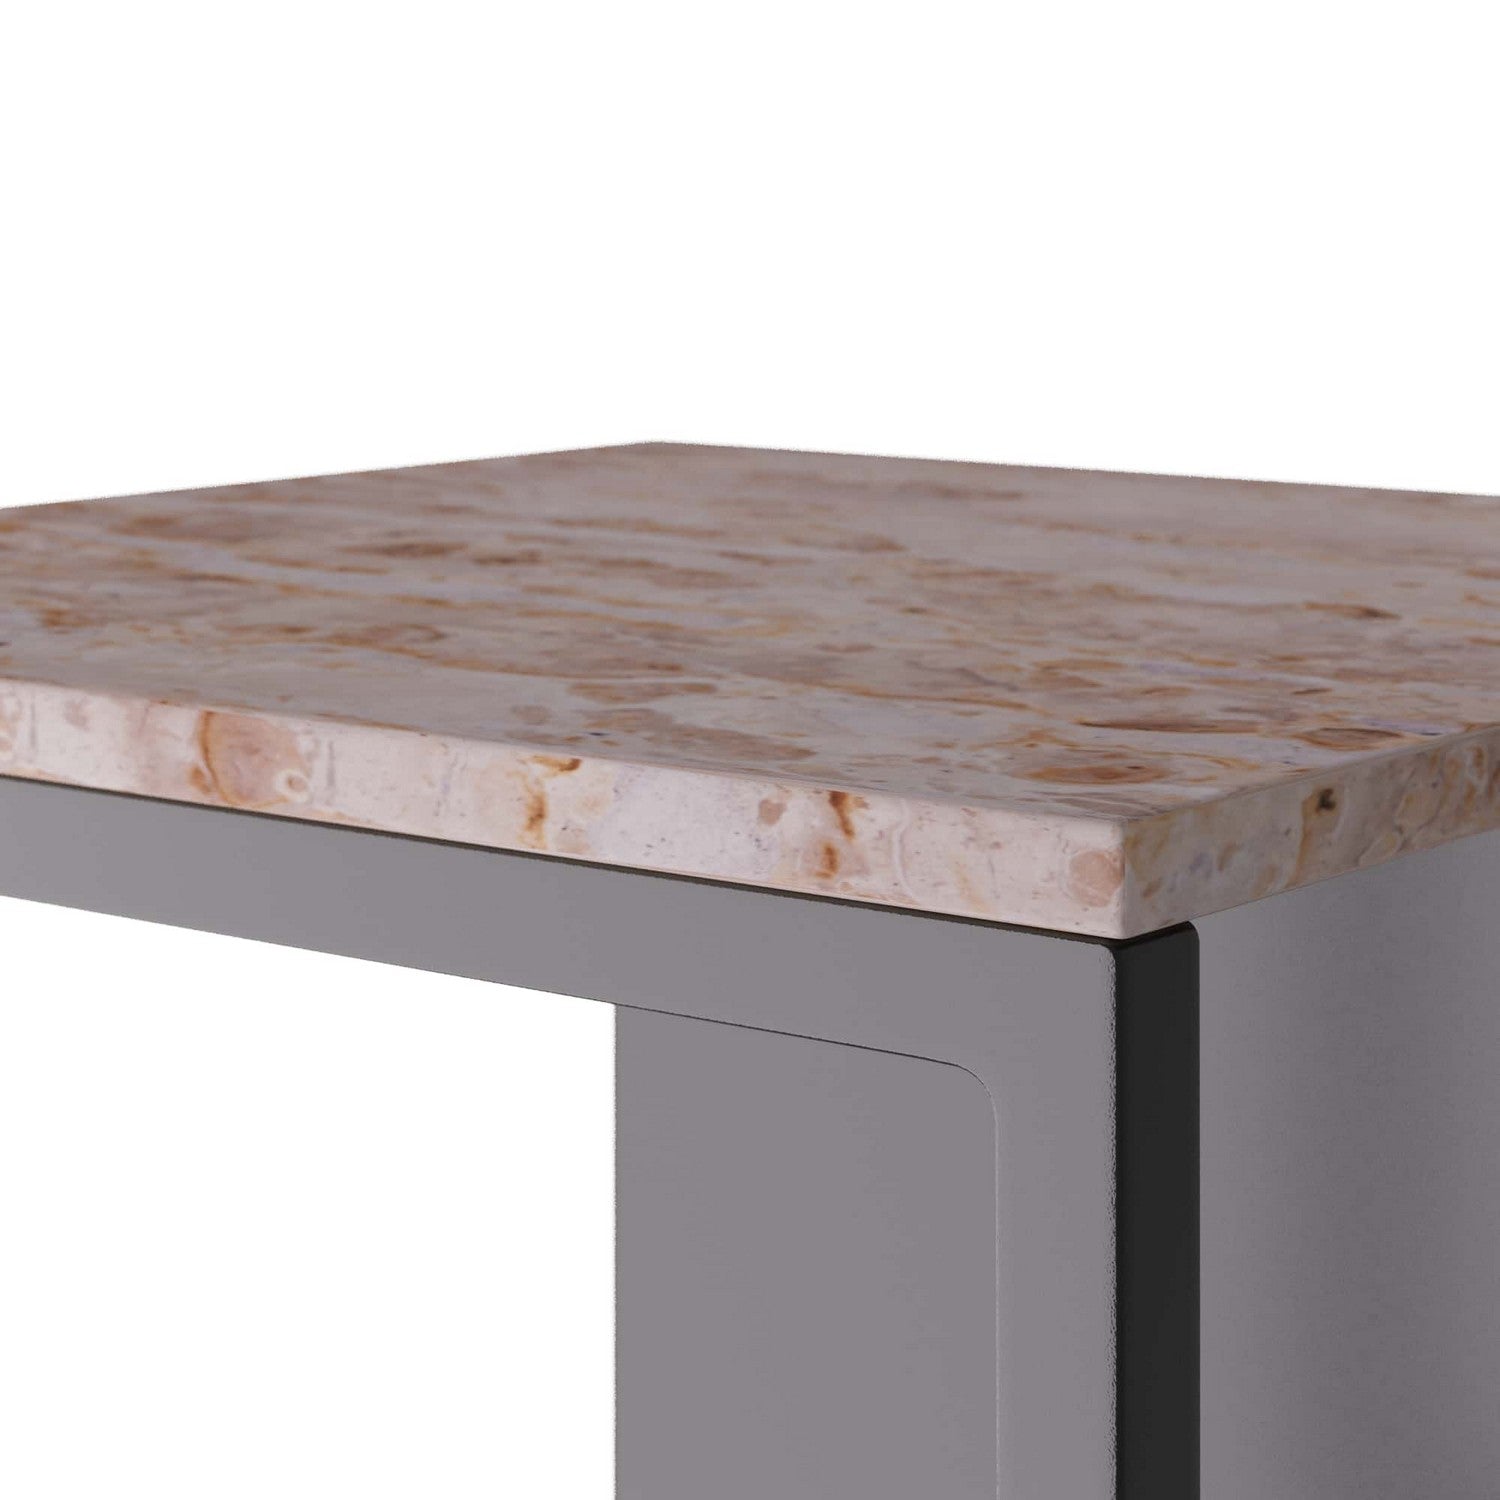 End Table from the Verbena collection in Capri finish